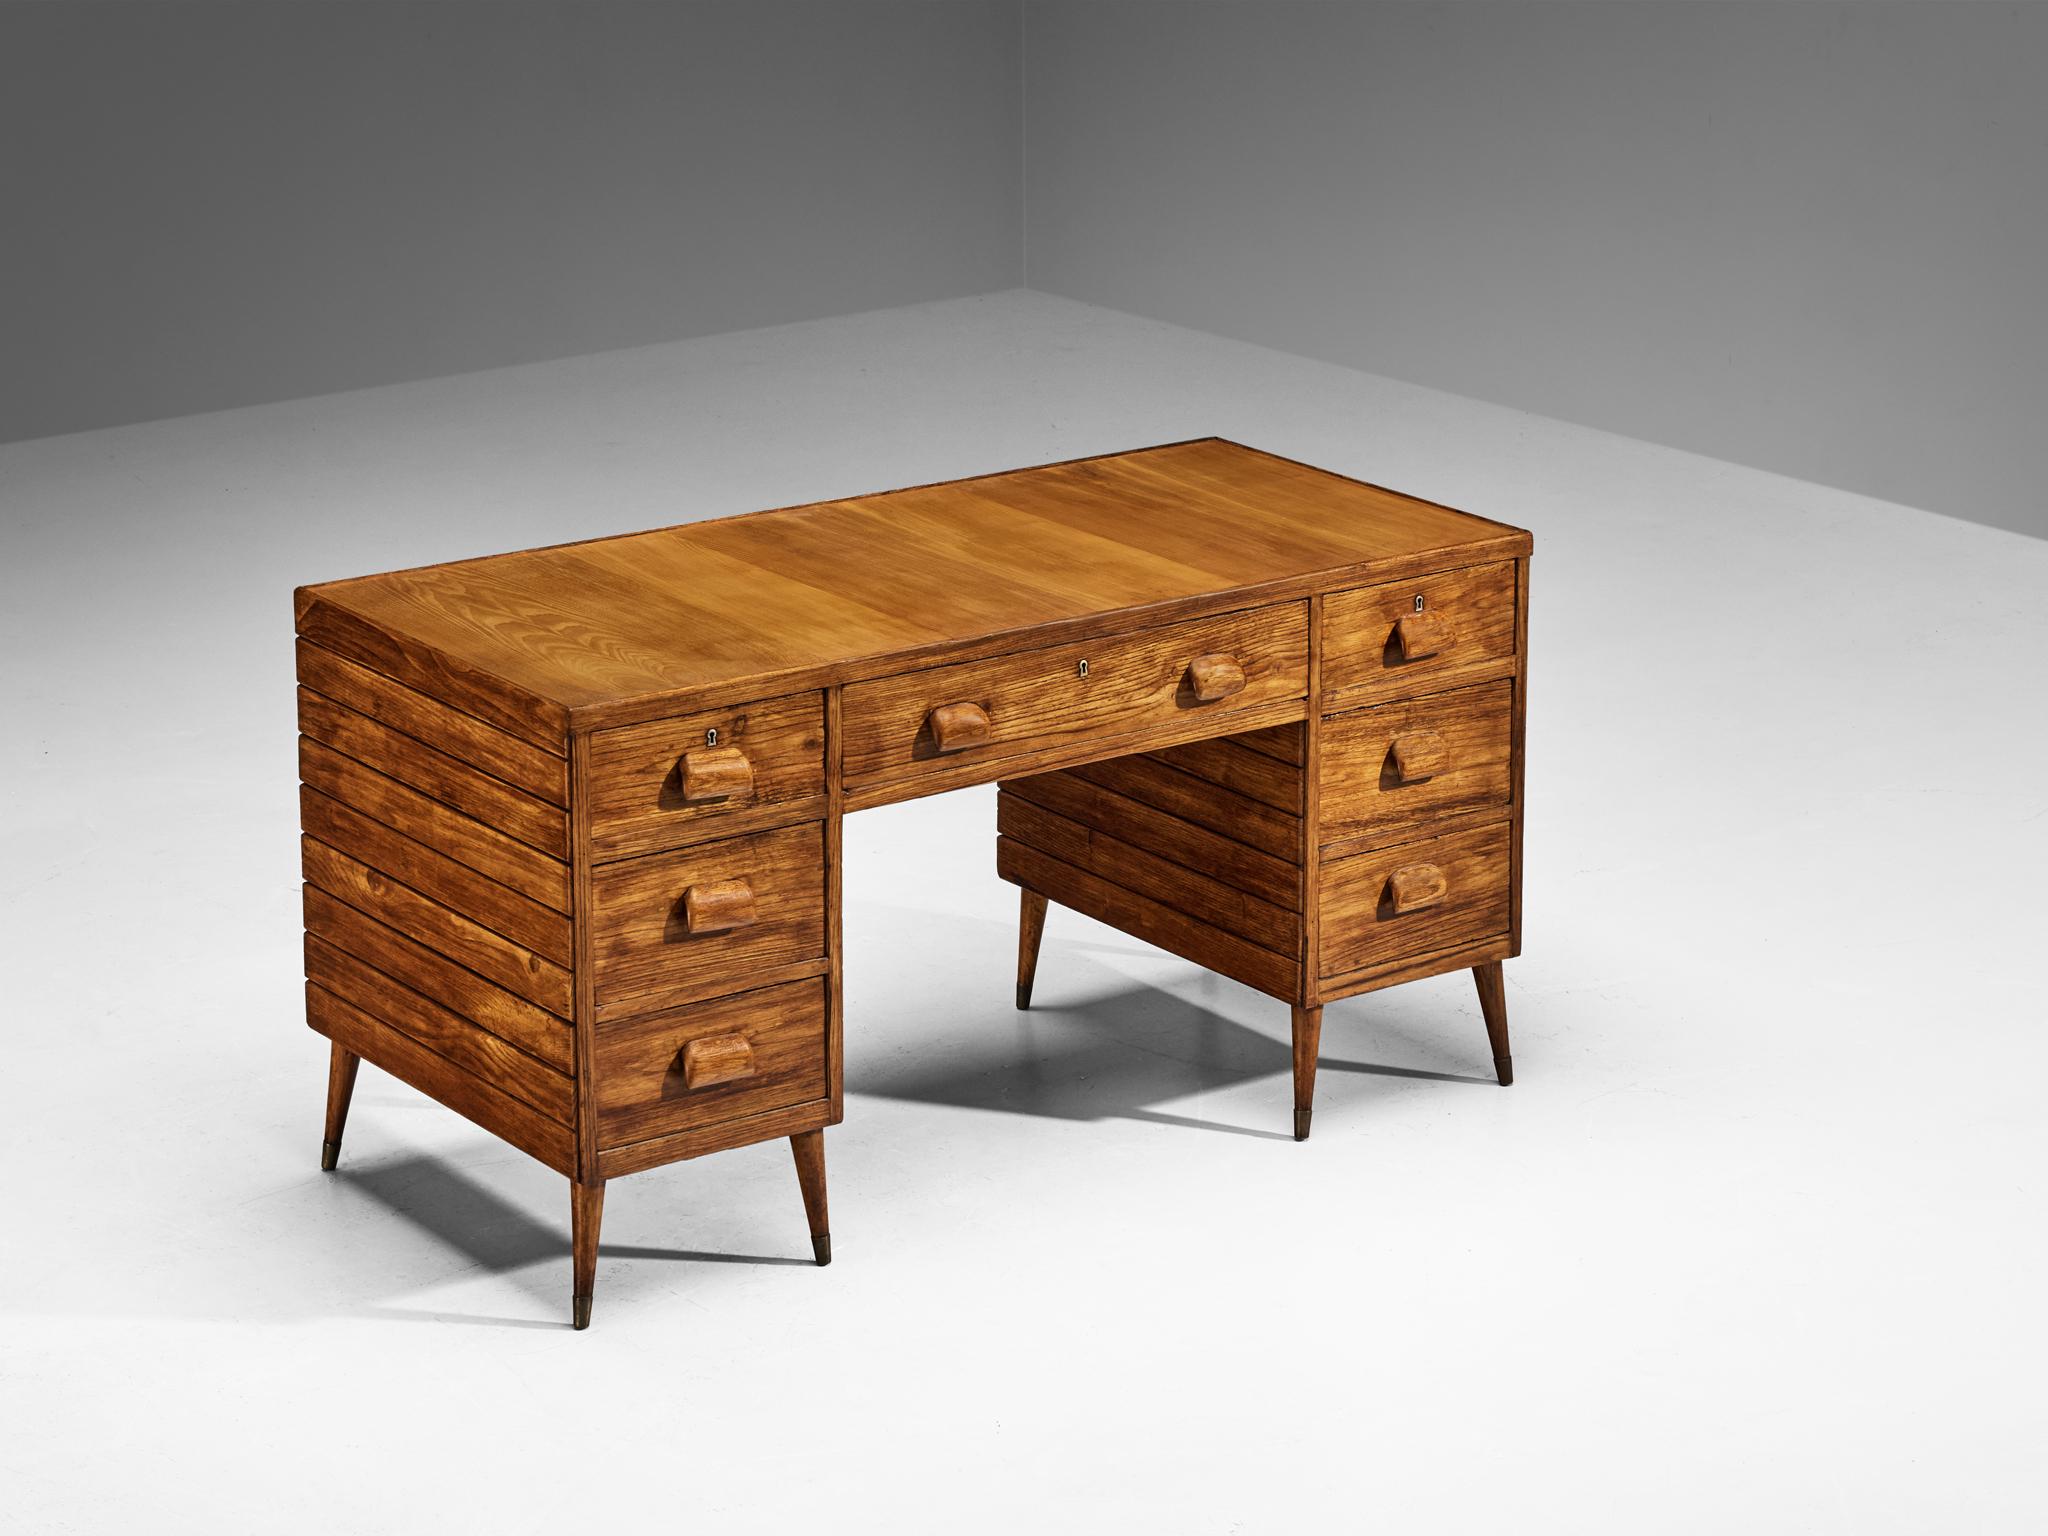 Writing desk, ash, brass, Italy, 1940s

Made in Italy, this writing desk is a testament to the design ethos prevalent in the 1940s and 1950s. The office table bears witness to the designer's excellent taste for form and distinctive usage of